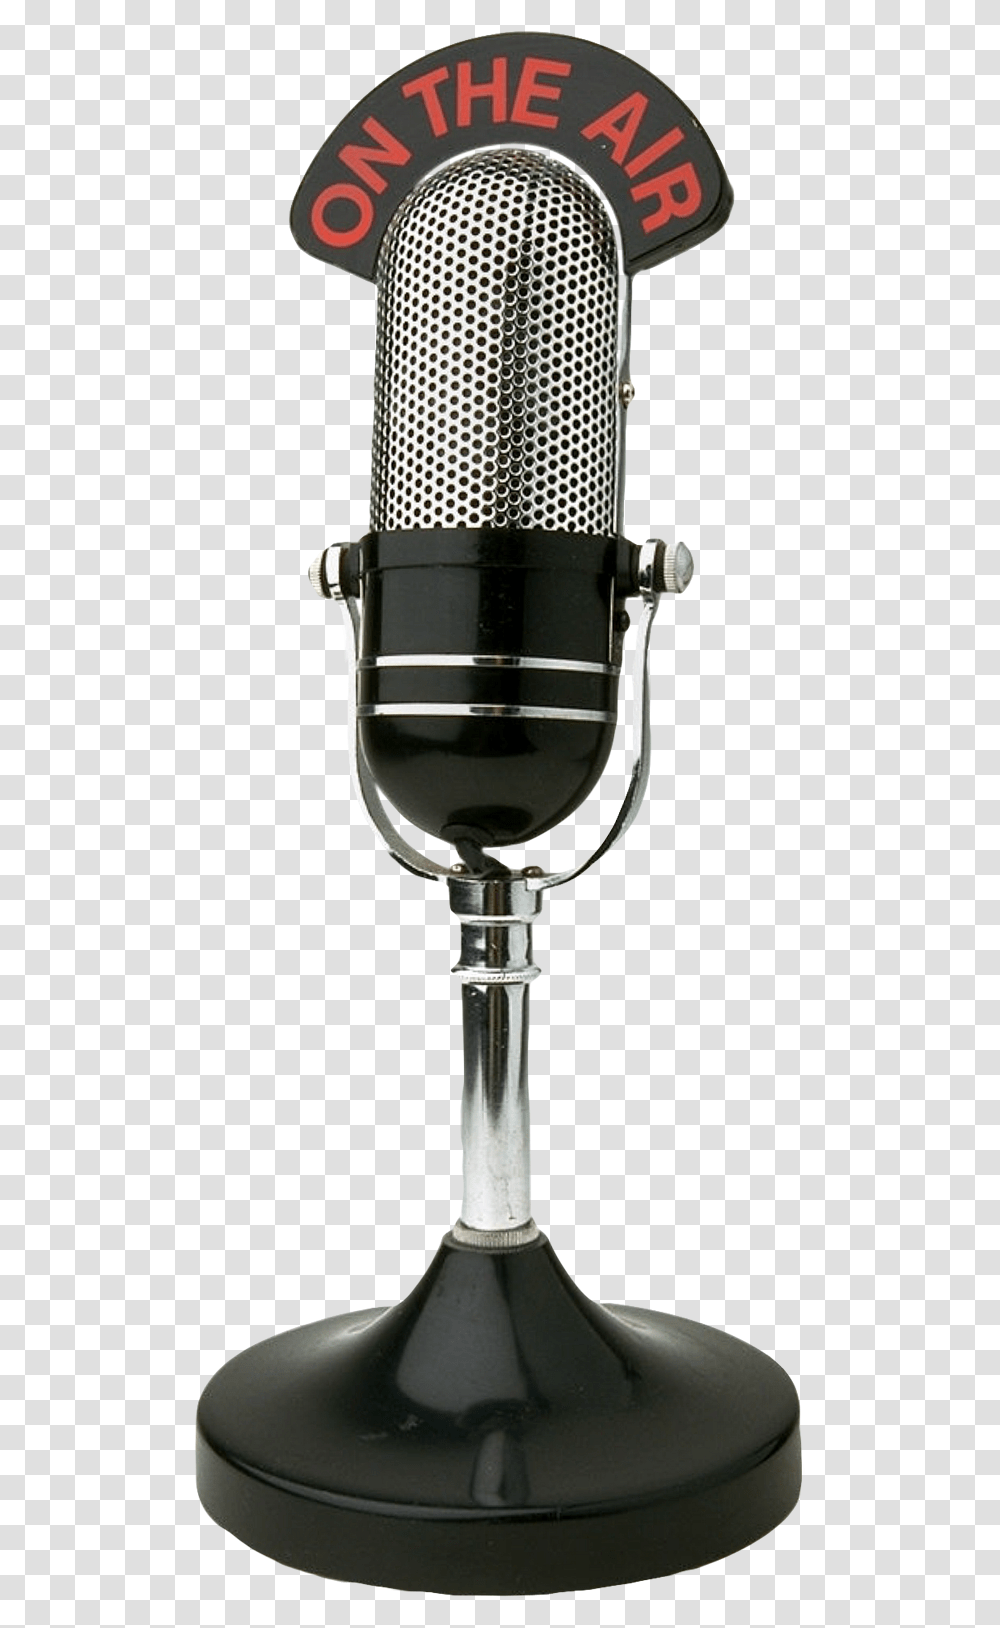 Microphone Image Purepng Free Cc0 Radio Microphone, Lamp, Electrical Device, Glass, Goblet Transparent Png